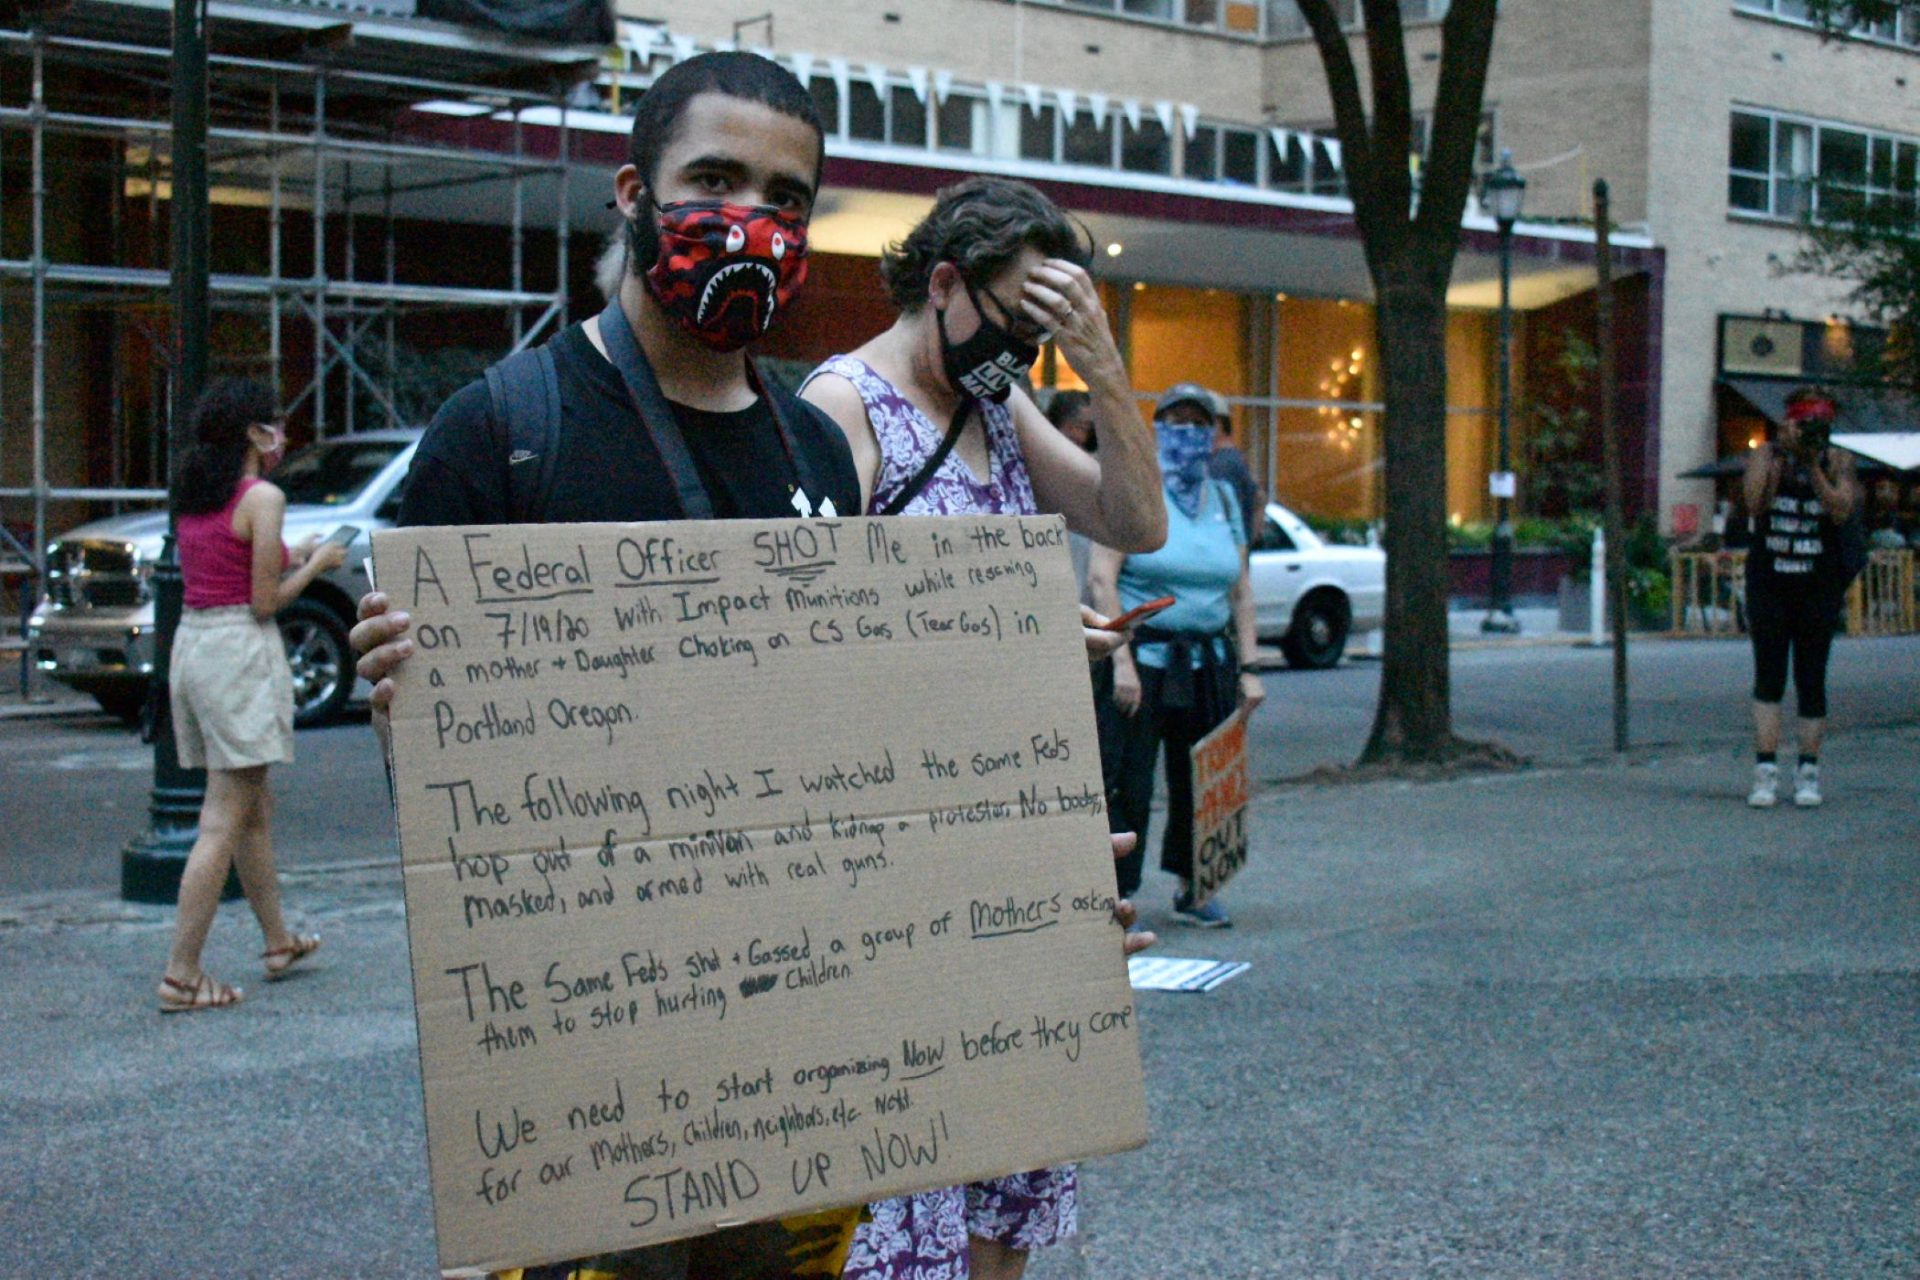 Jordan Johnson holds a sign detailing a recent incident with what he says were federal police in Portland, Oregon.